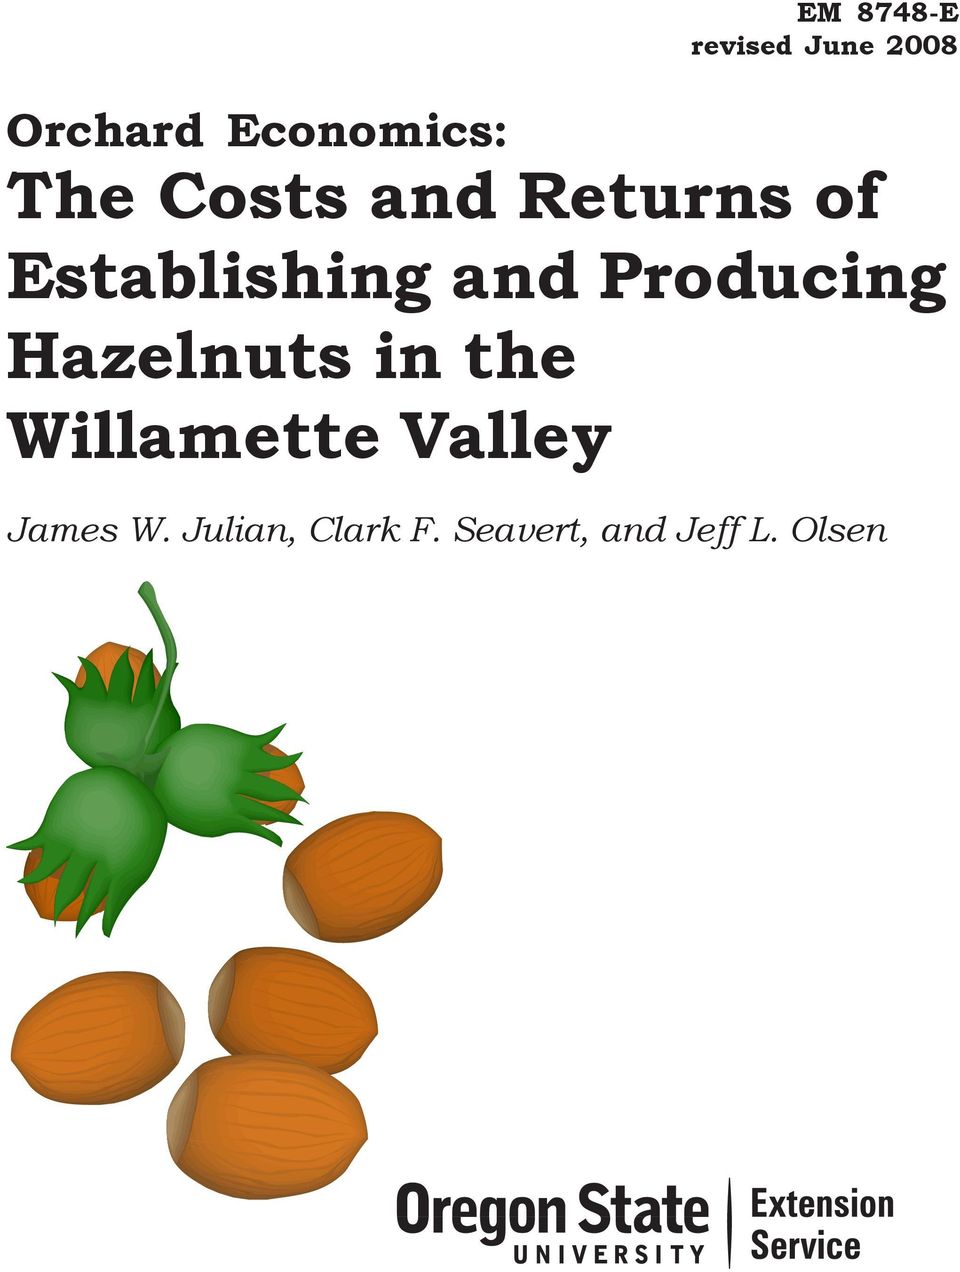 Producing Hazelnuts in the Willamette Valley